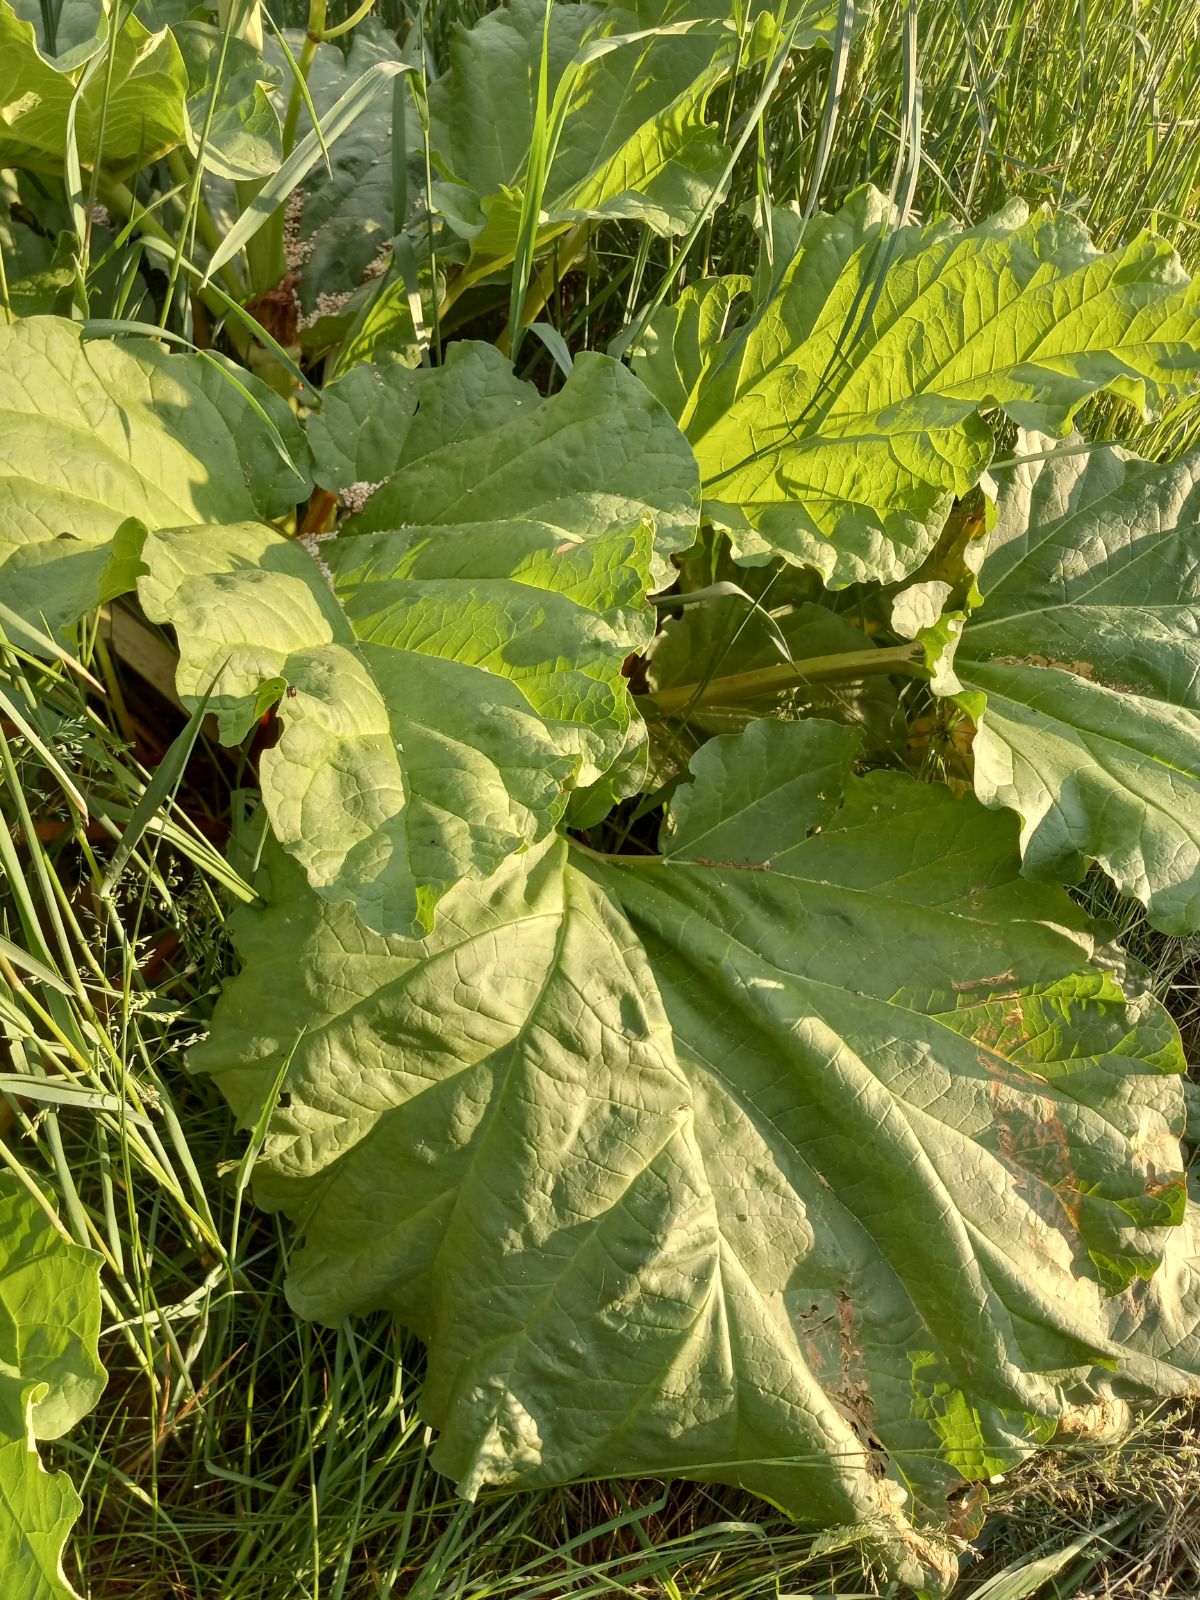 Perennial rhubarb plants with grass growing 